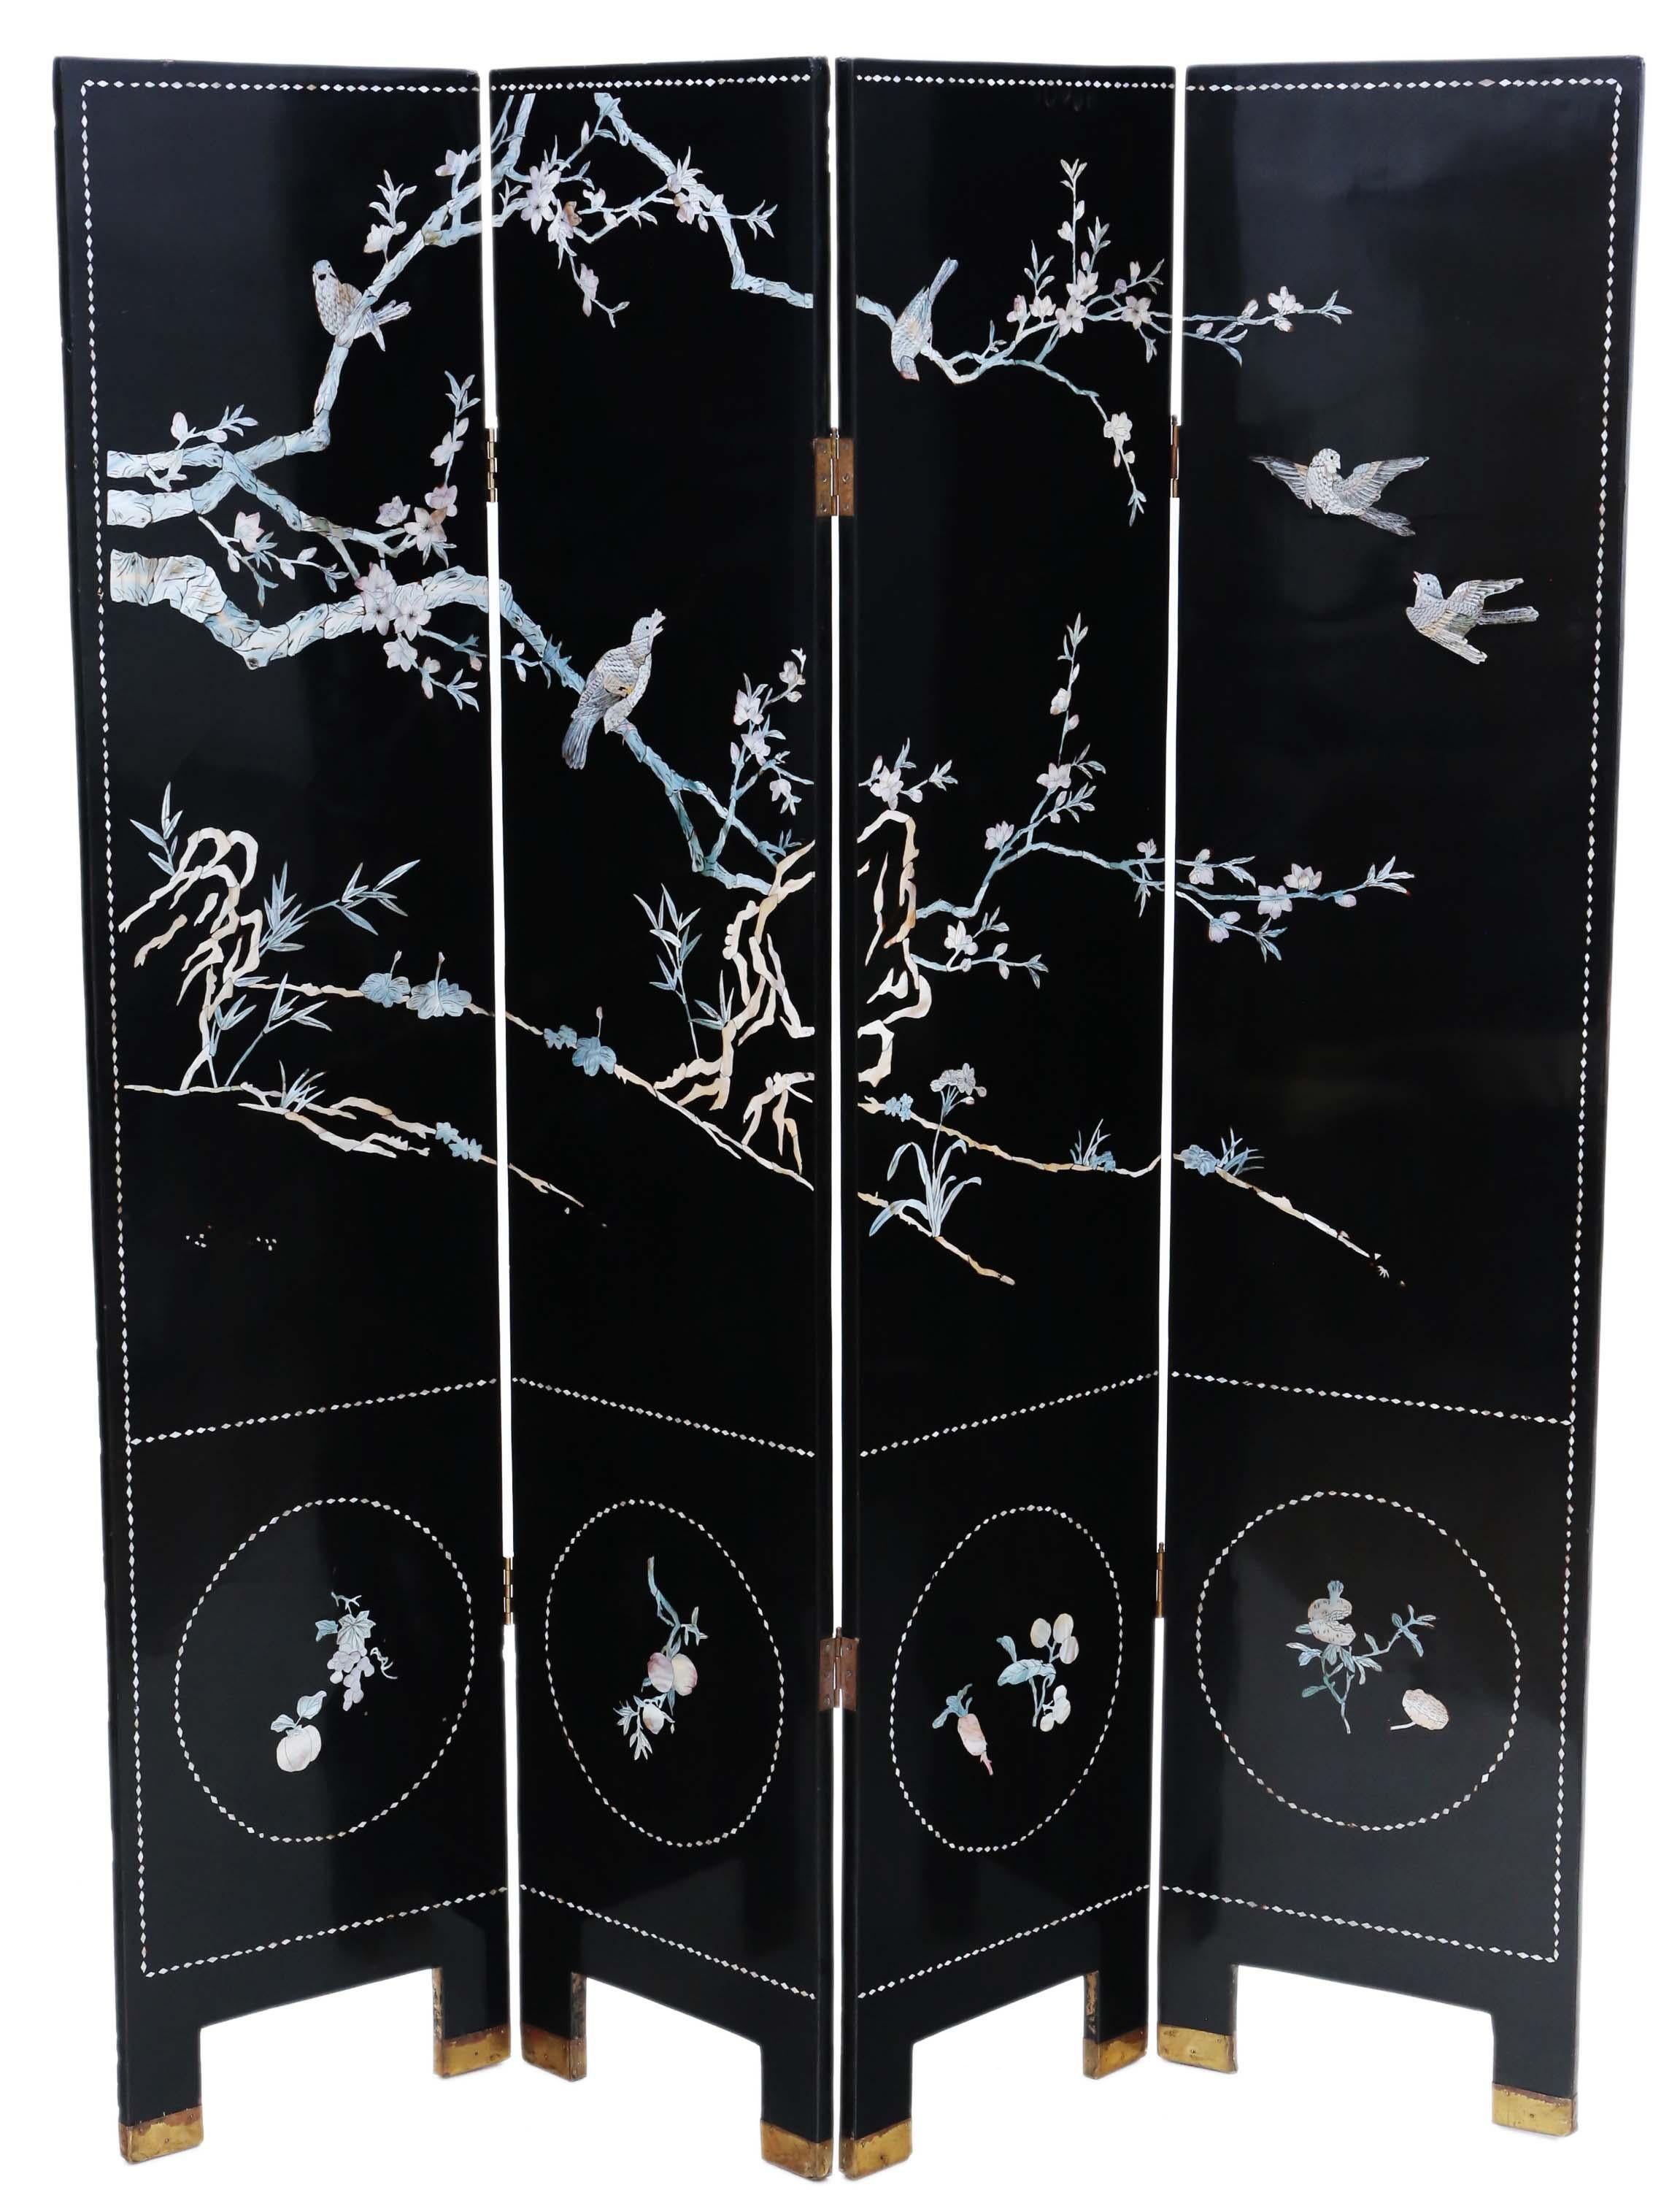 Antique fine quality large Victorian Chinoiserie C1900 black lacquer papier mache dressing screen or room divider. Attractive designs painted on one side and inlaid on the other. A rare find.

Would look amazing in the right location, with a